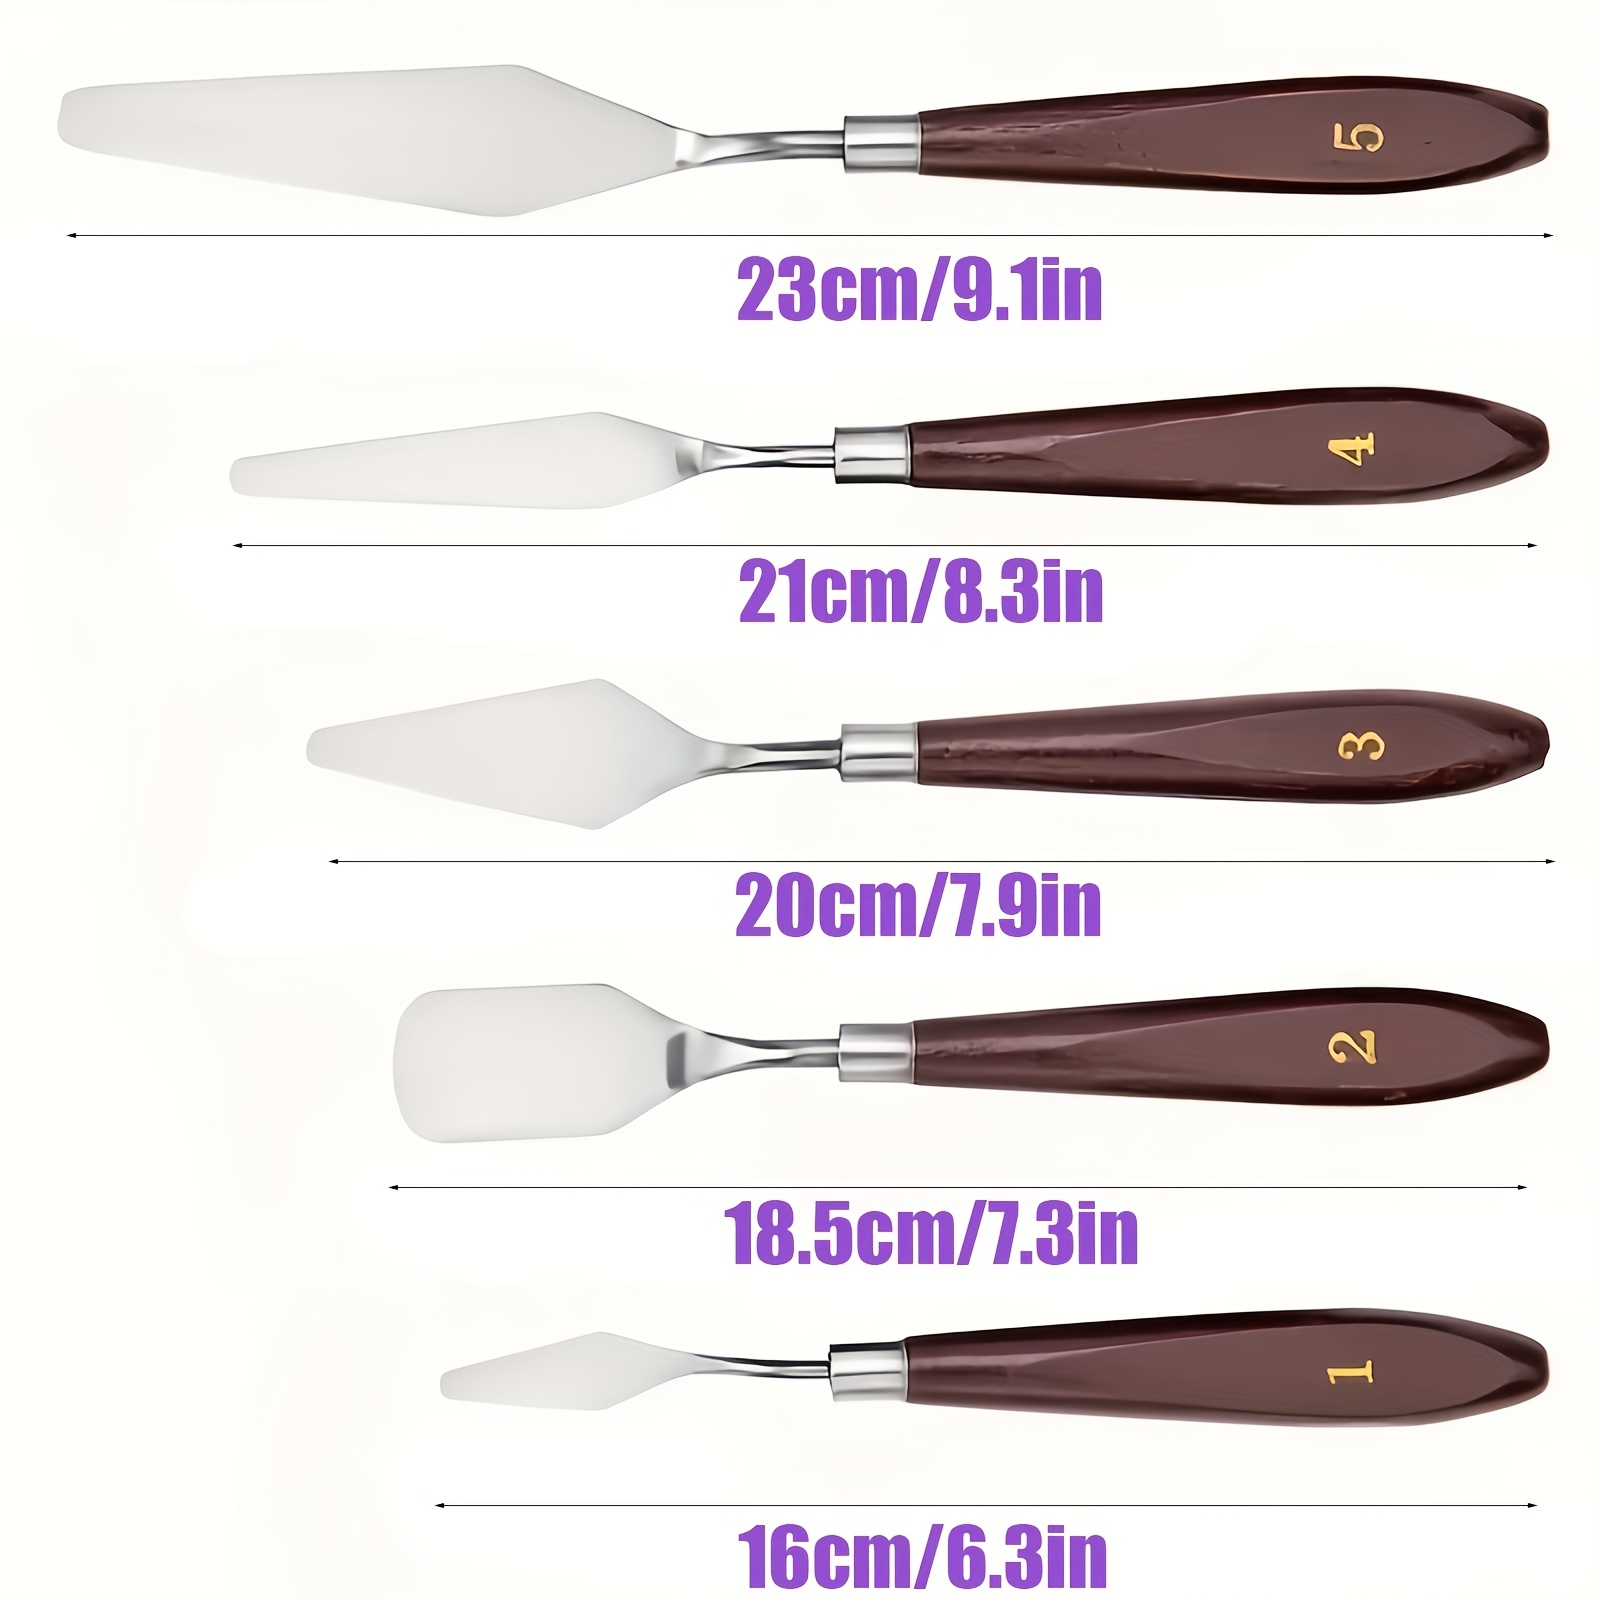 7pcs/set Stainless Steel Oil Painting Knife Artist Spatula Art Tools  Stationery Cake Baking Supplies Painting Tools